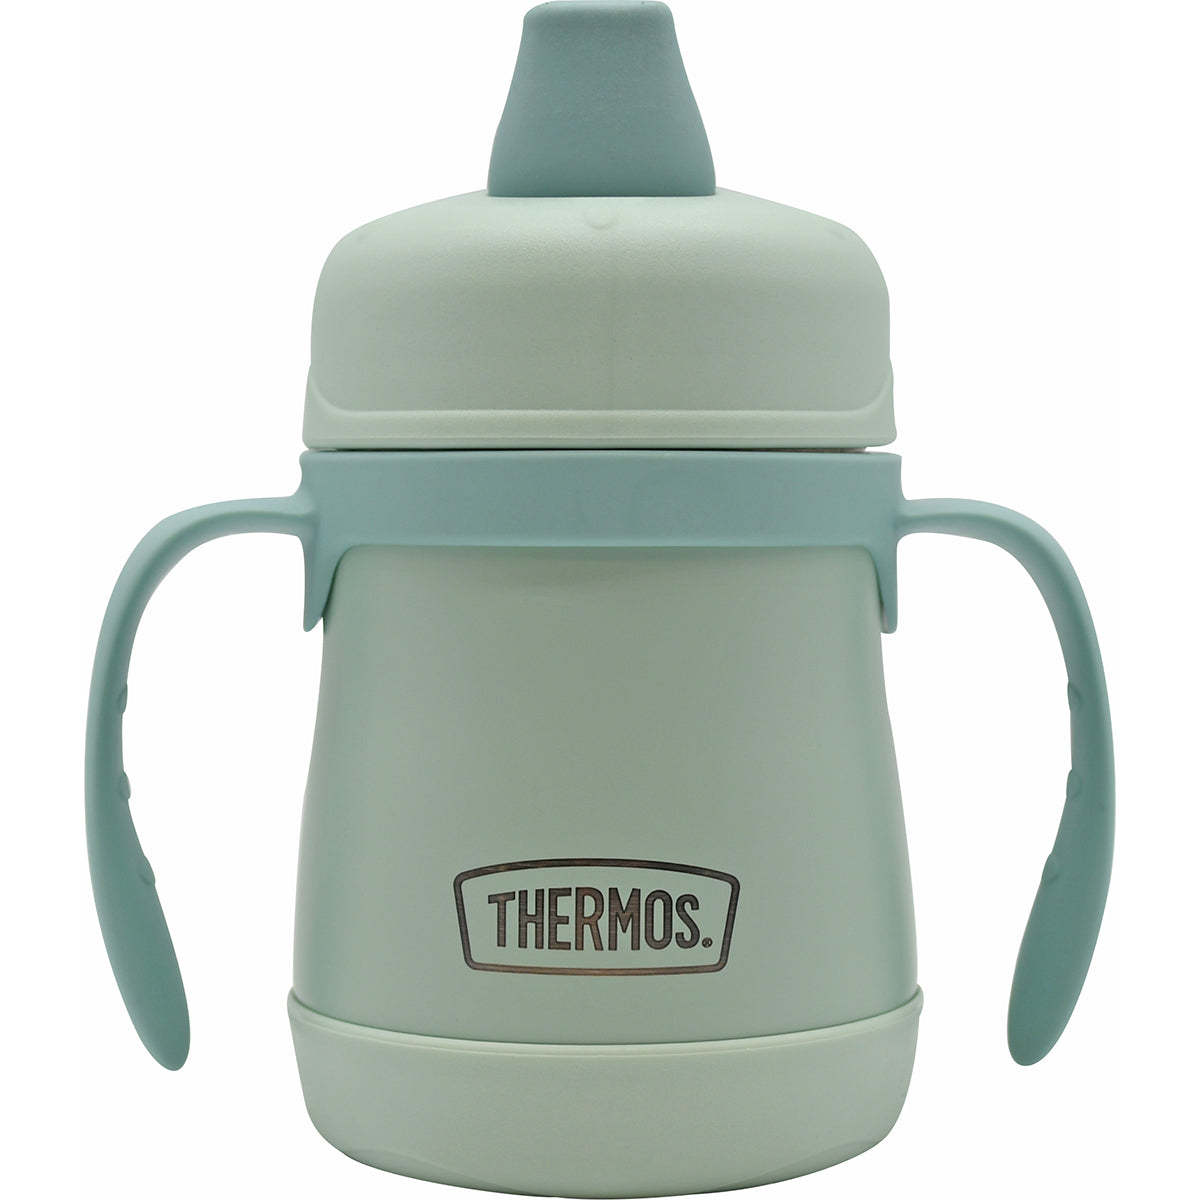 Thermos Baby 7 oz. Vacuum Insulated Stainless Steel Sippy Cup with Handles Thermos